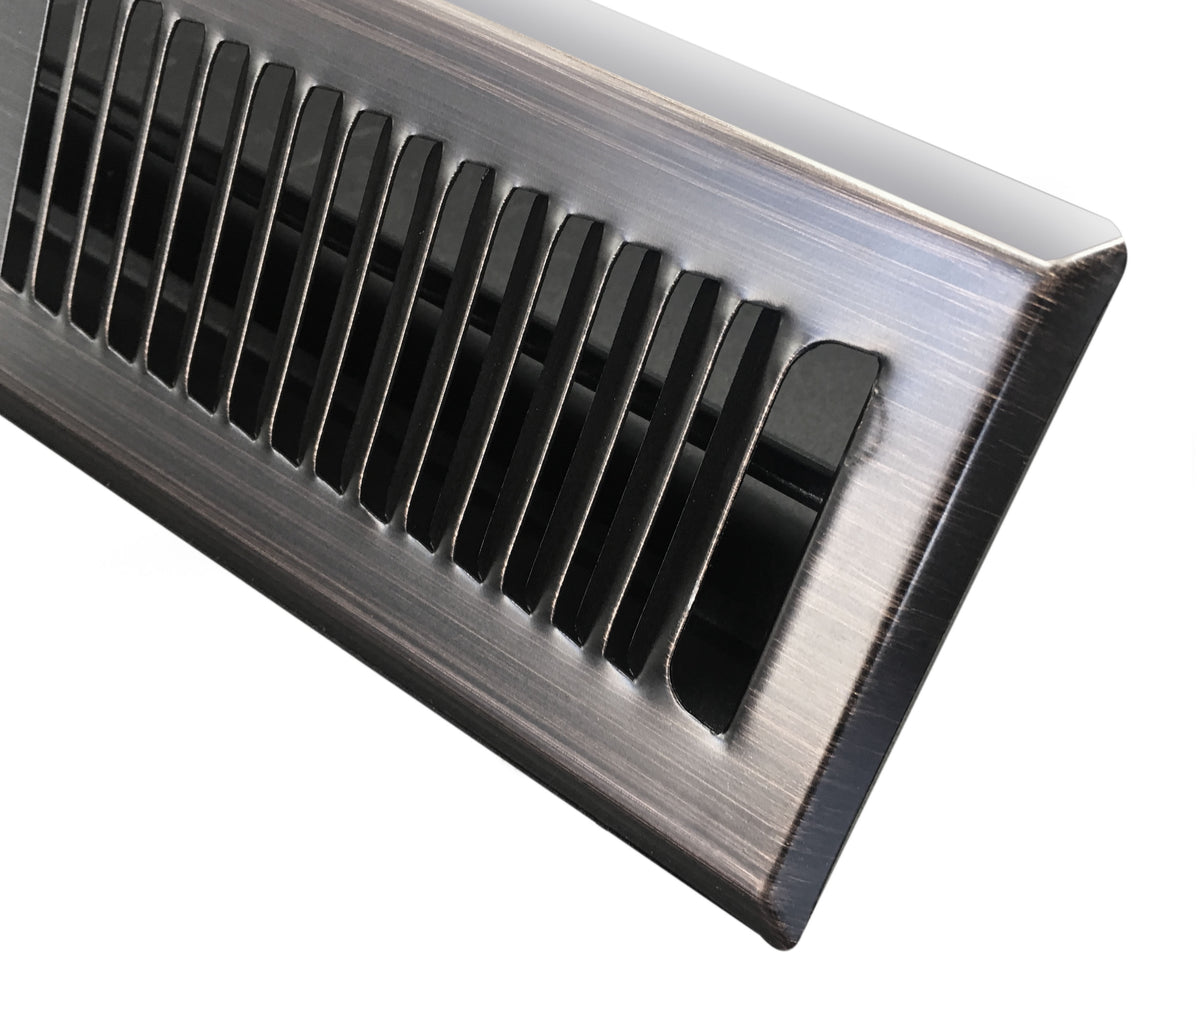 2&quot; X 12&quot; Modern Floor Register Grille With Dampers - Contempo Slotted Grate - HVAC Vent Duct Cover - Matte Black